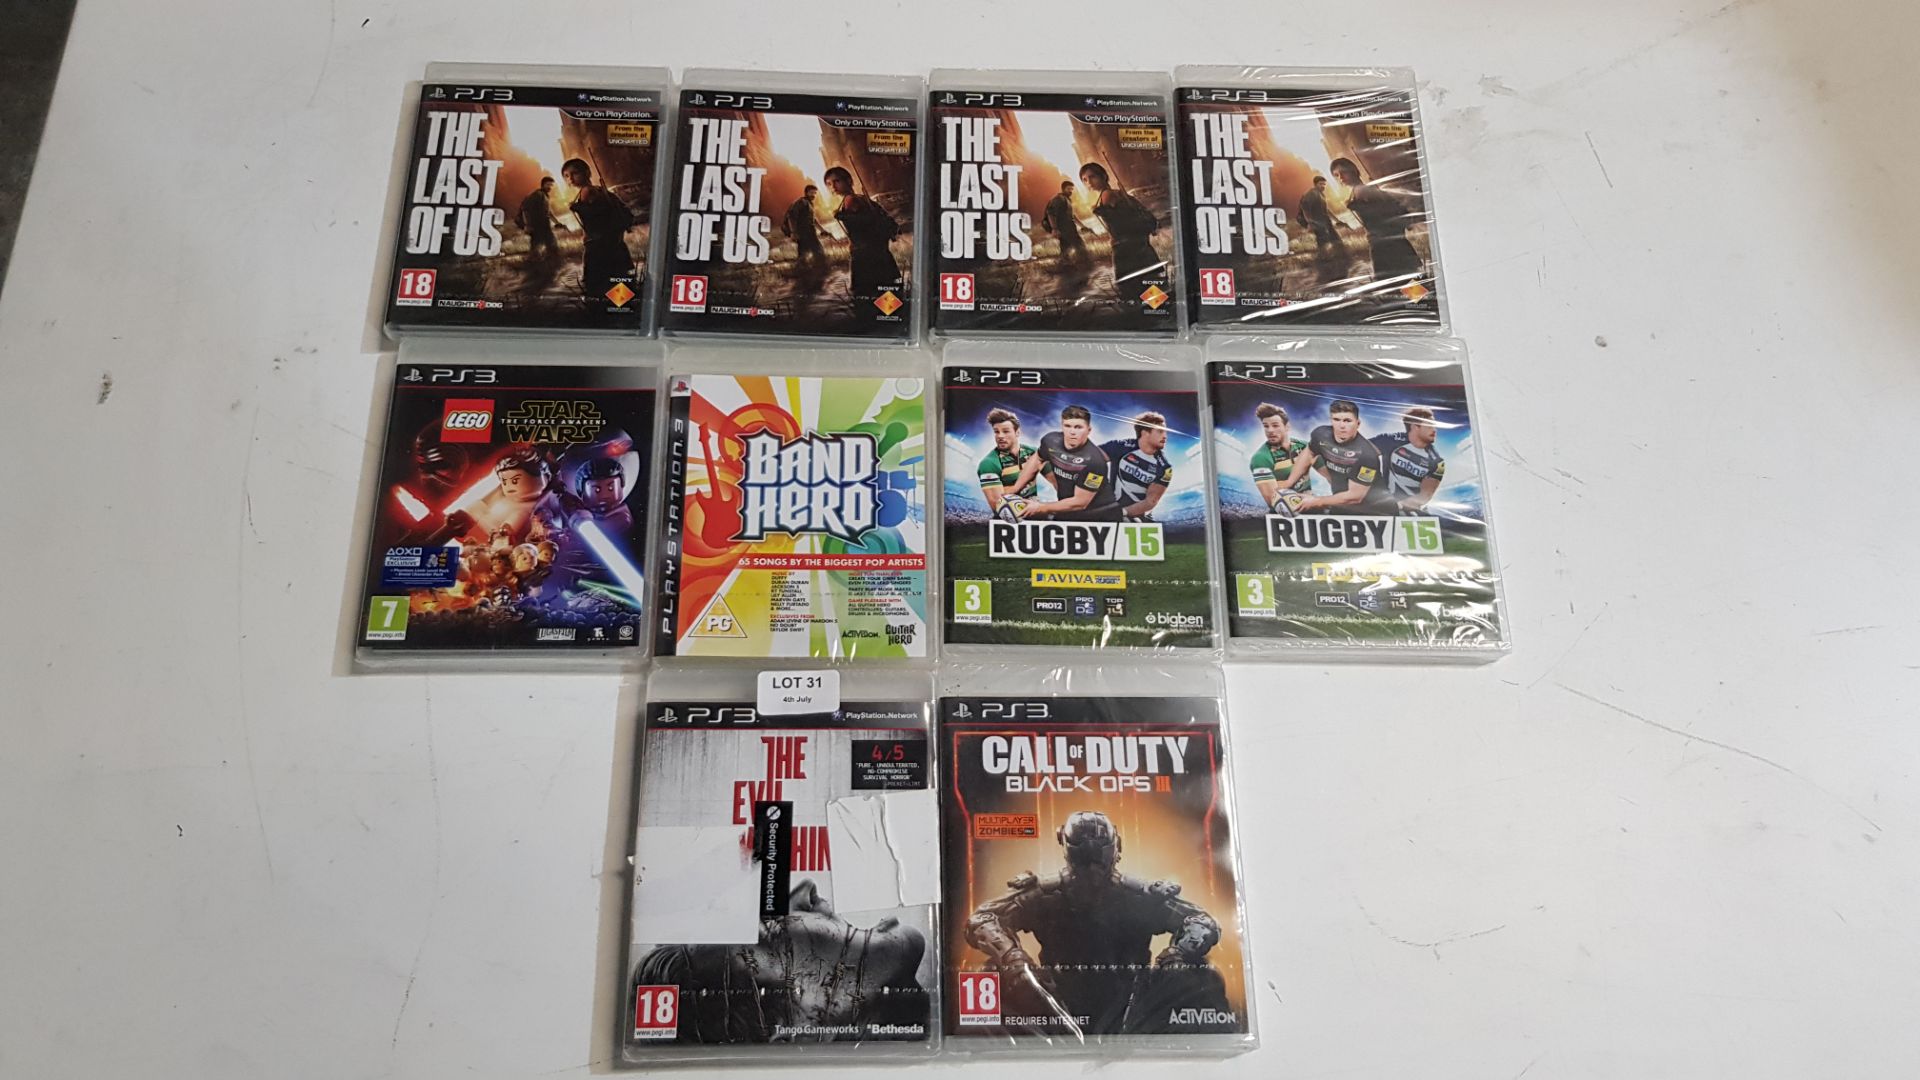 10x Mixed PS3 Games. All New And Sealed. 4x The Last Of Us. 2x Rugby 15. 1x Band Hero. 1x Call Of D - Image 5 of 5